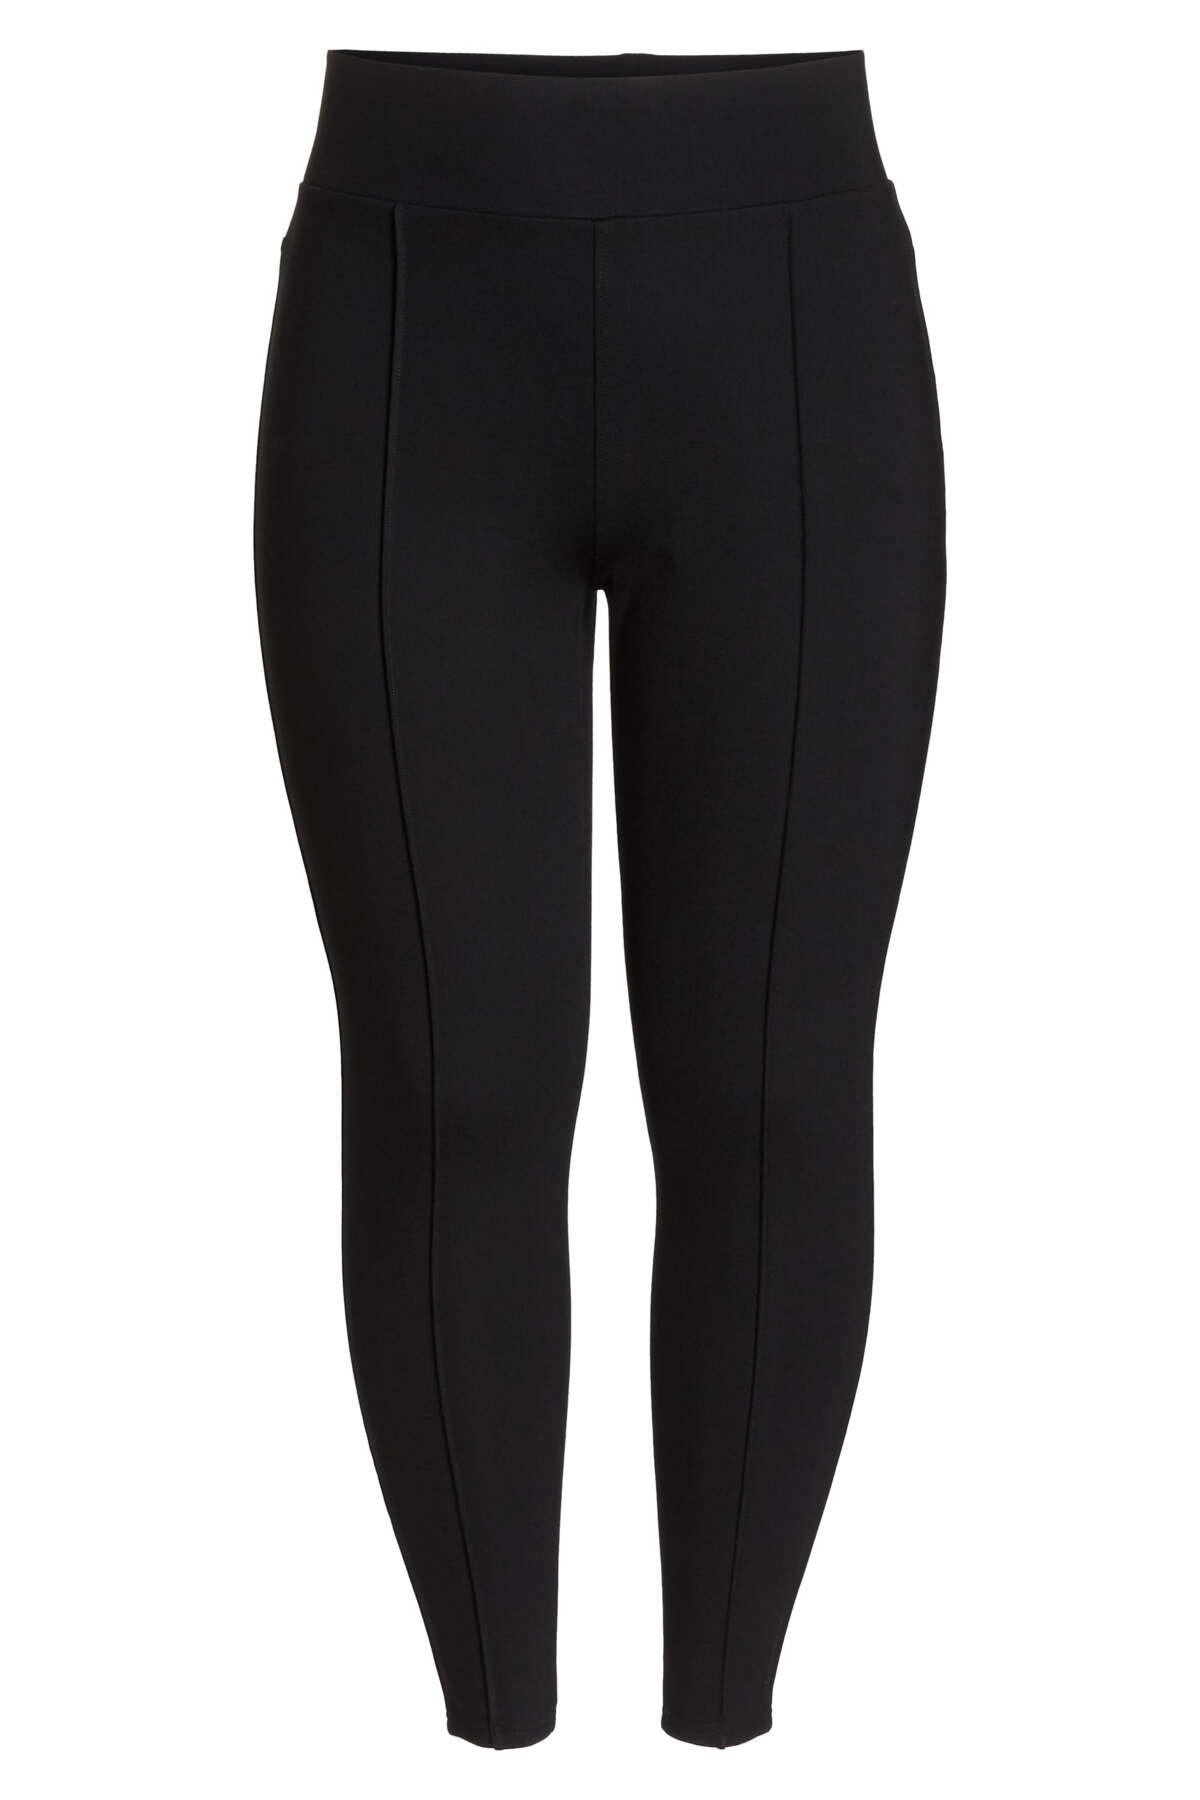 Seven7 Ultra High Rise Pull-on Stretch Ponte Leggings (plus Size) in Black